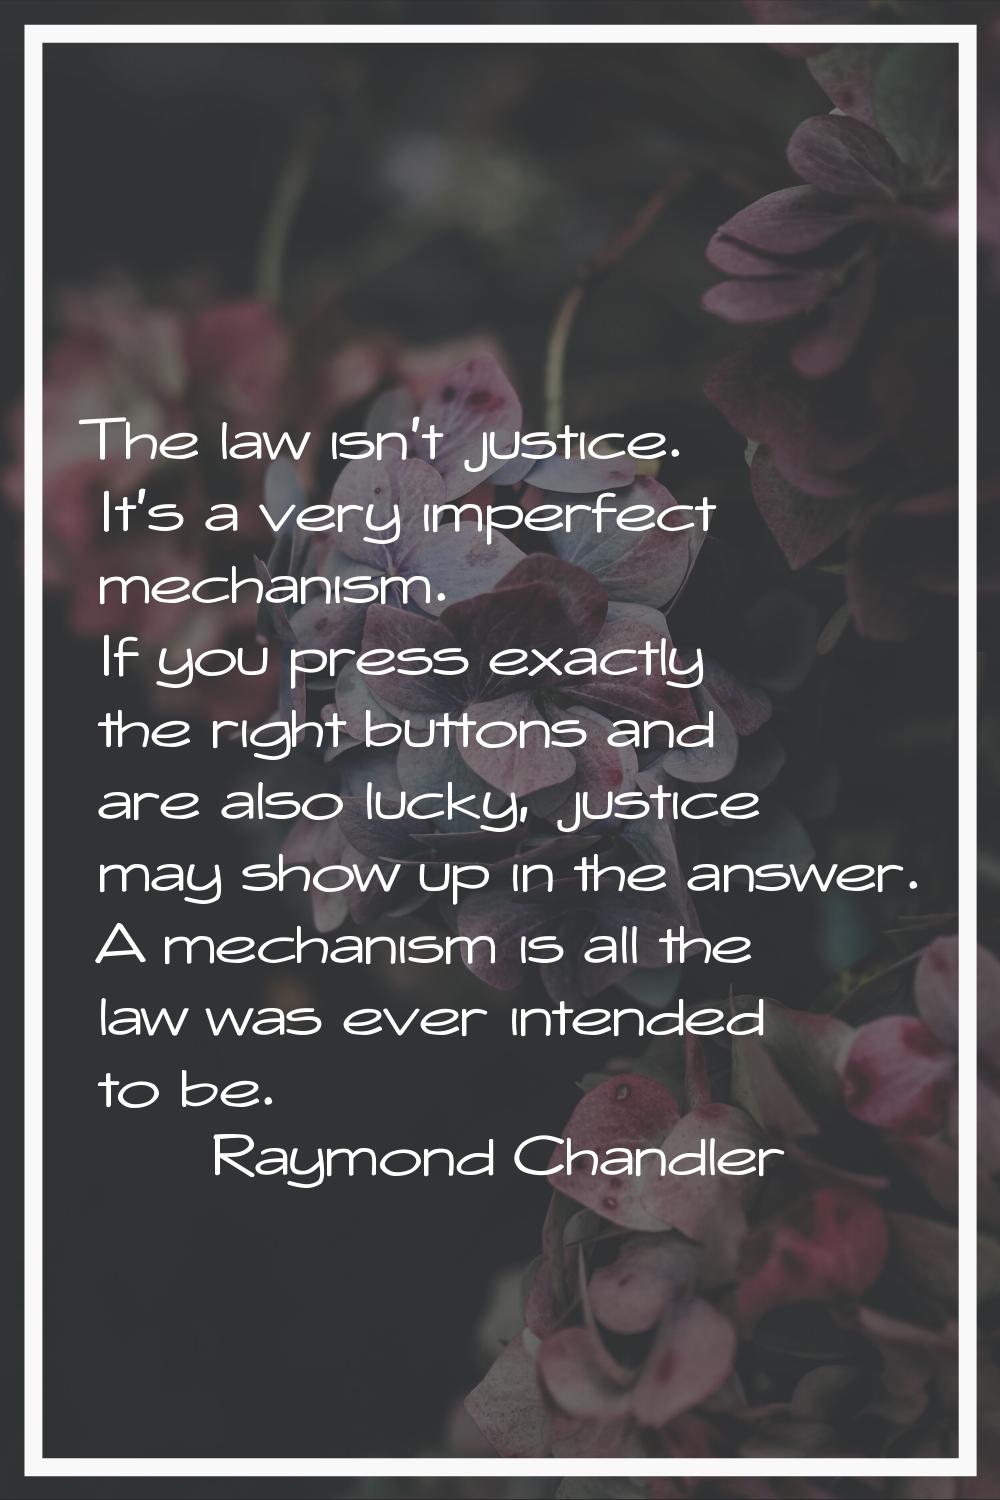 The law isn't justice. It's a very imperfect mechanism. If you press exactly the right buttons and 